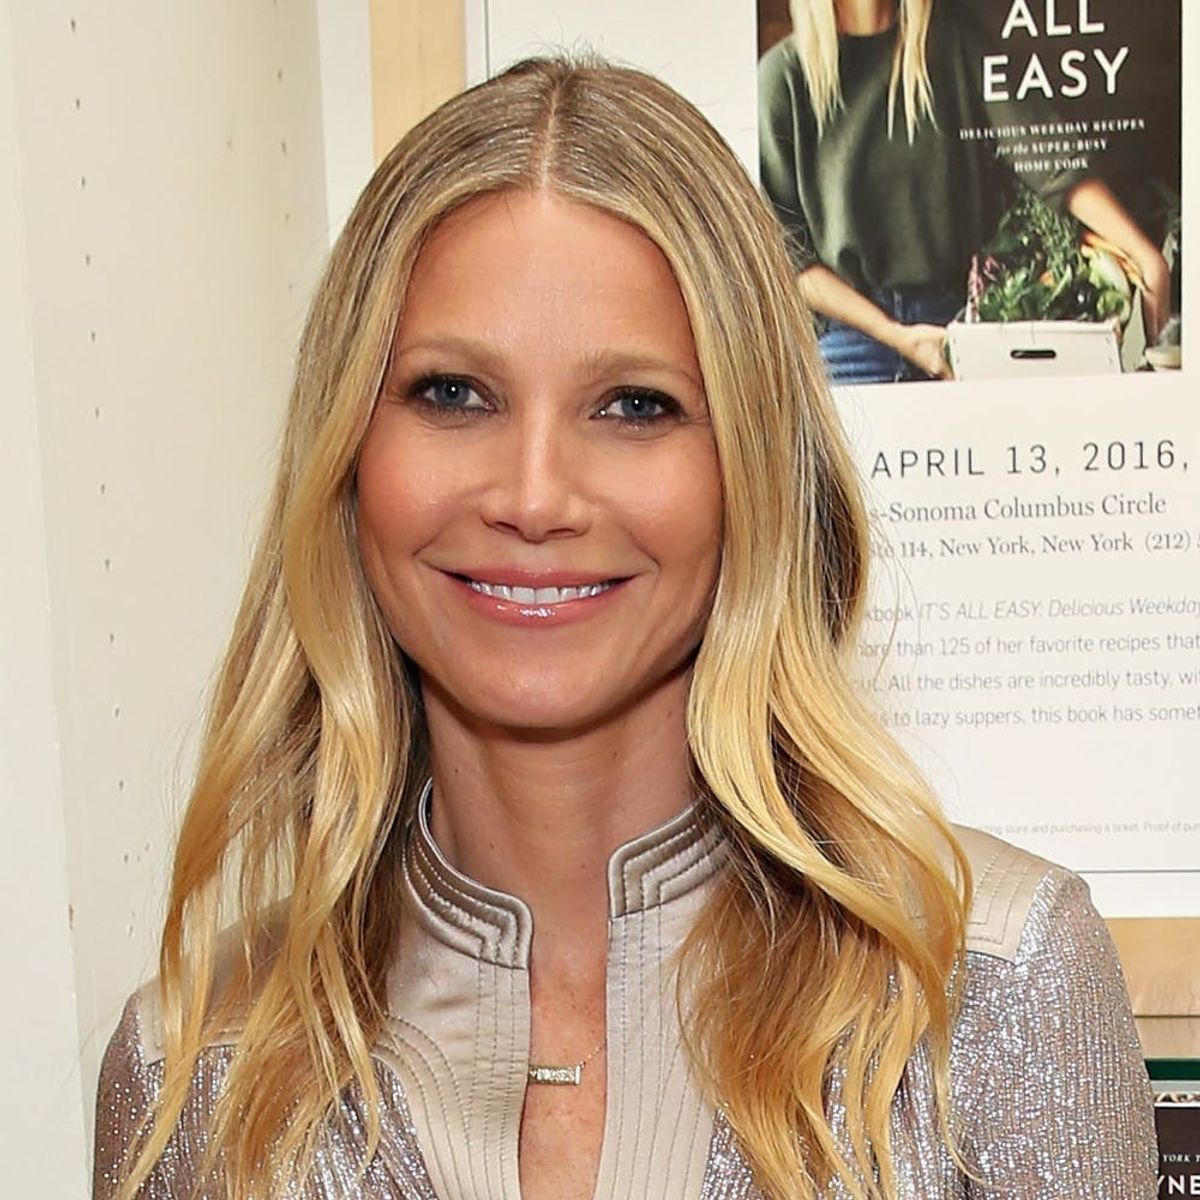 Gwyneth Paltrow Has Surprising Things to Say About GOOP and “Conscious Uncoupling”